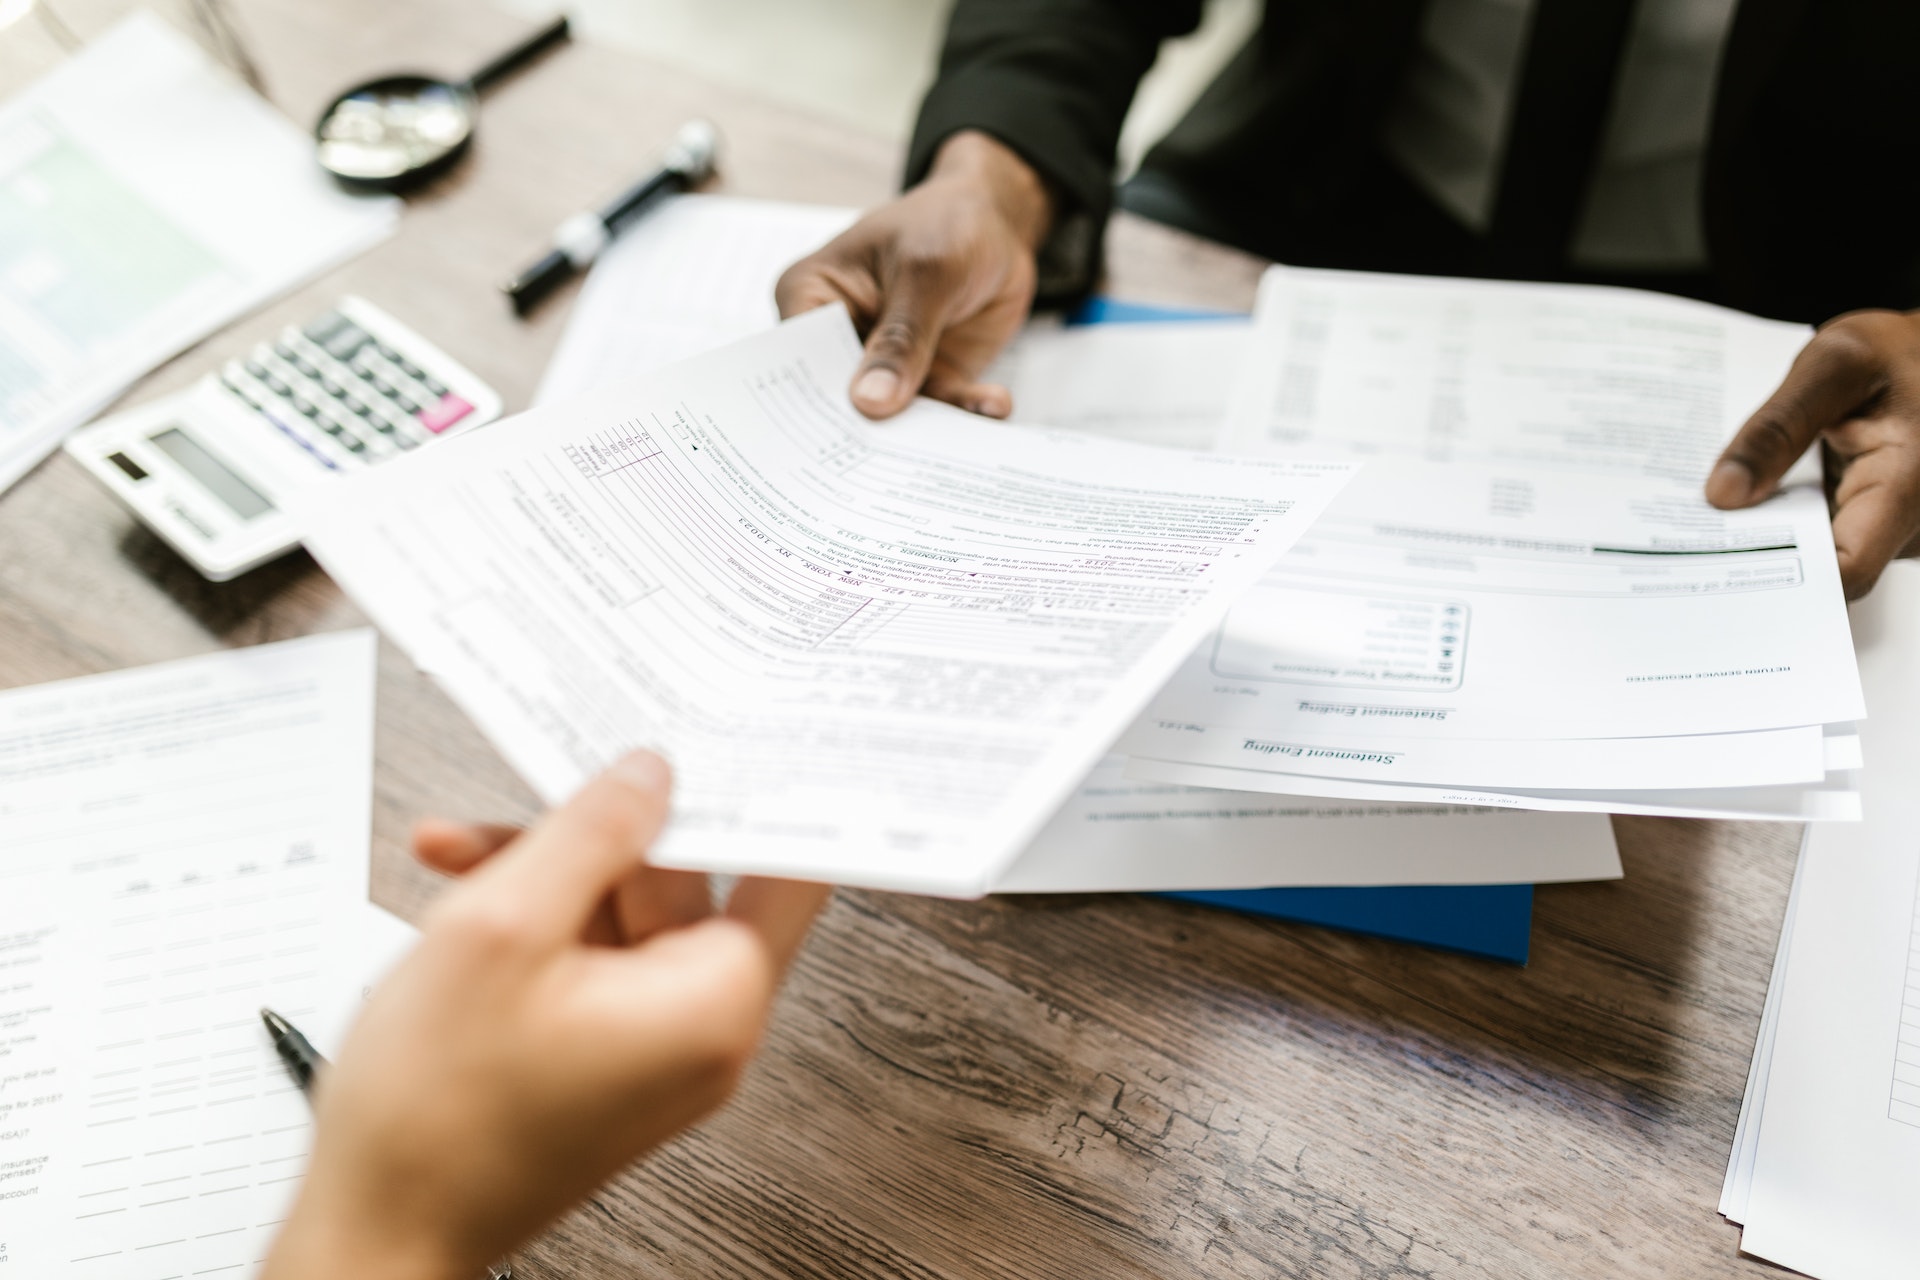 Image of an insurance broker handing paperwork to a person. Photo by RODNAE Productions: https://www.pexels.com/photo/handing-out-of-documents-7821684/